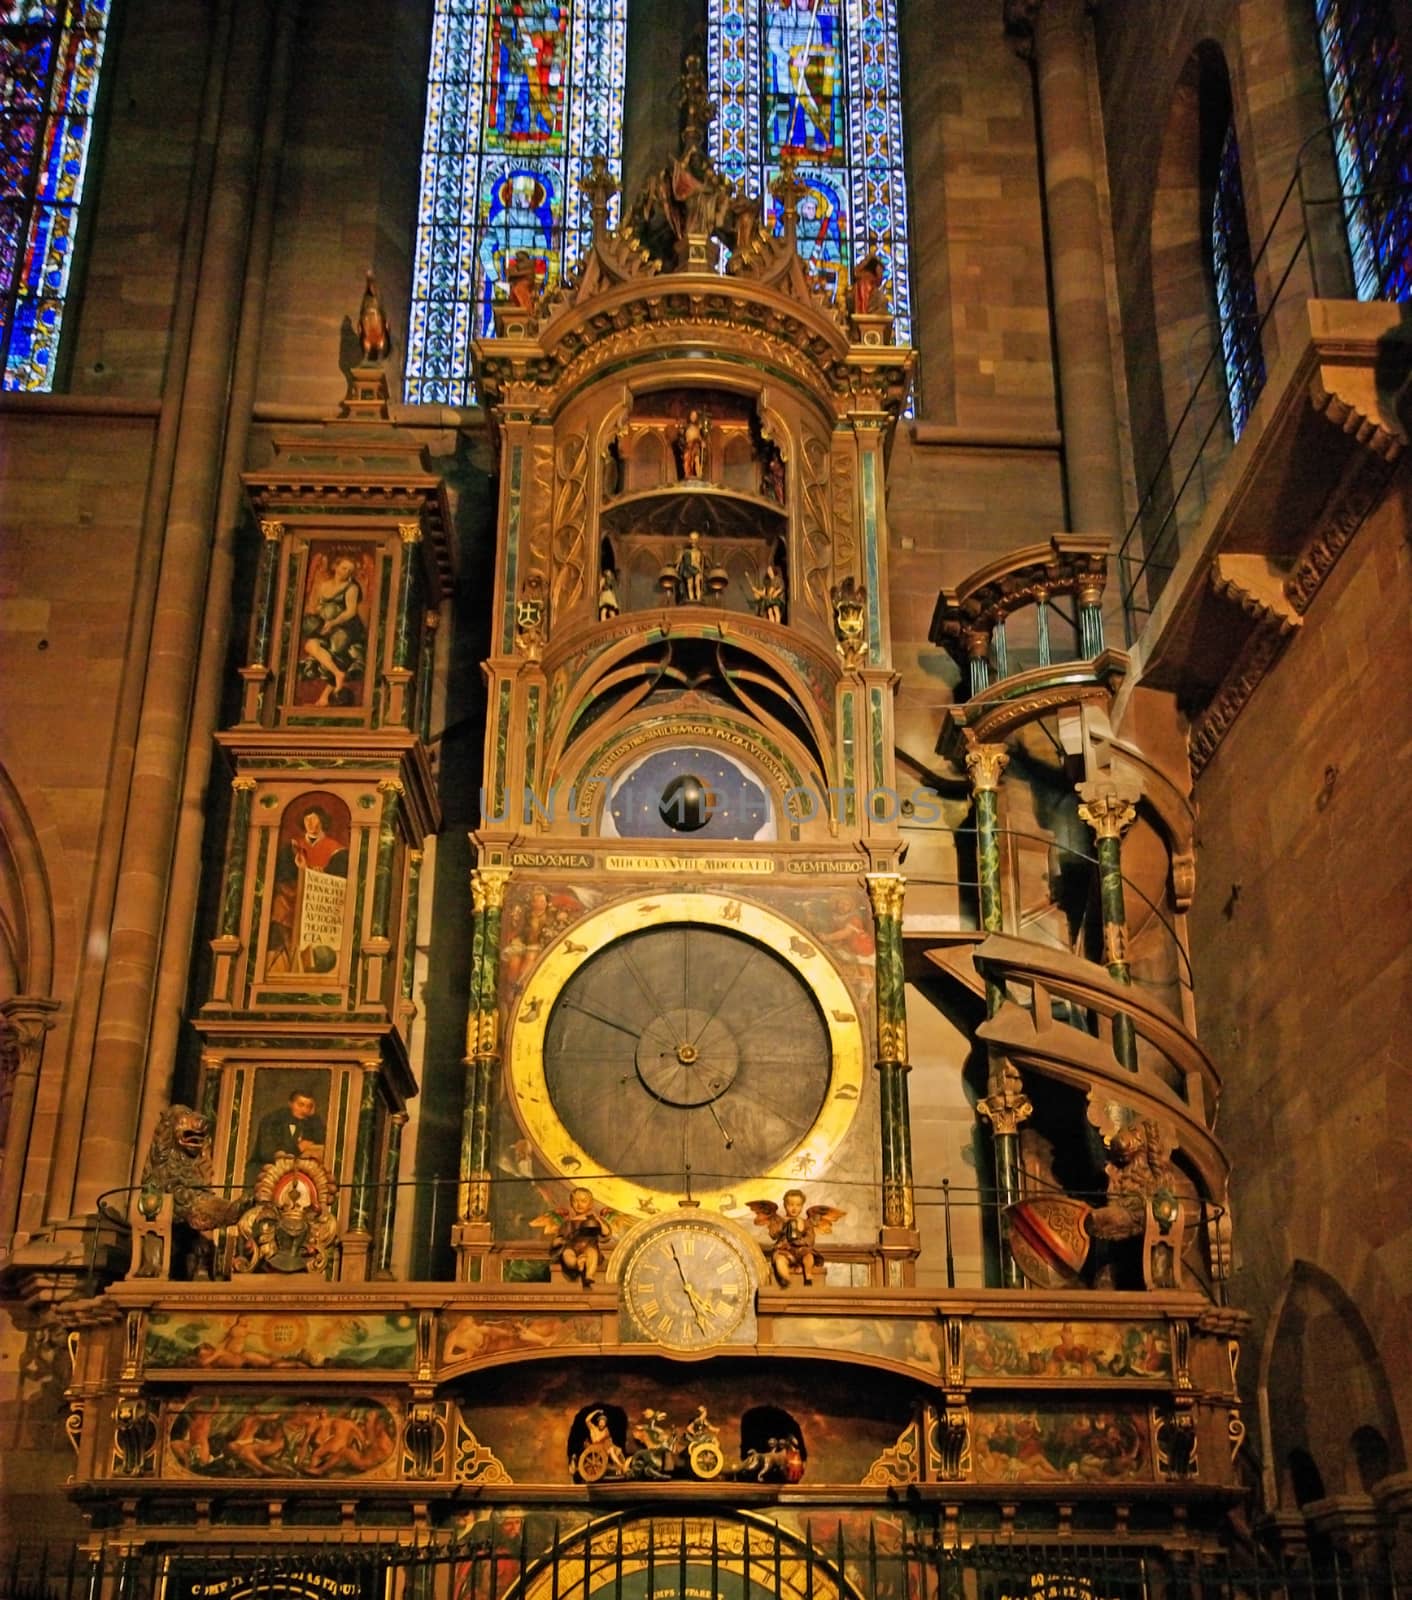 Astrological clock in Strasbourg Cathedral.